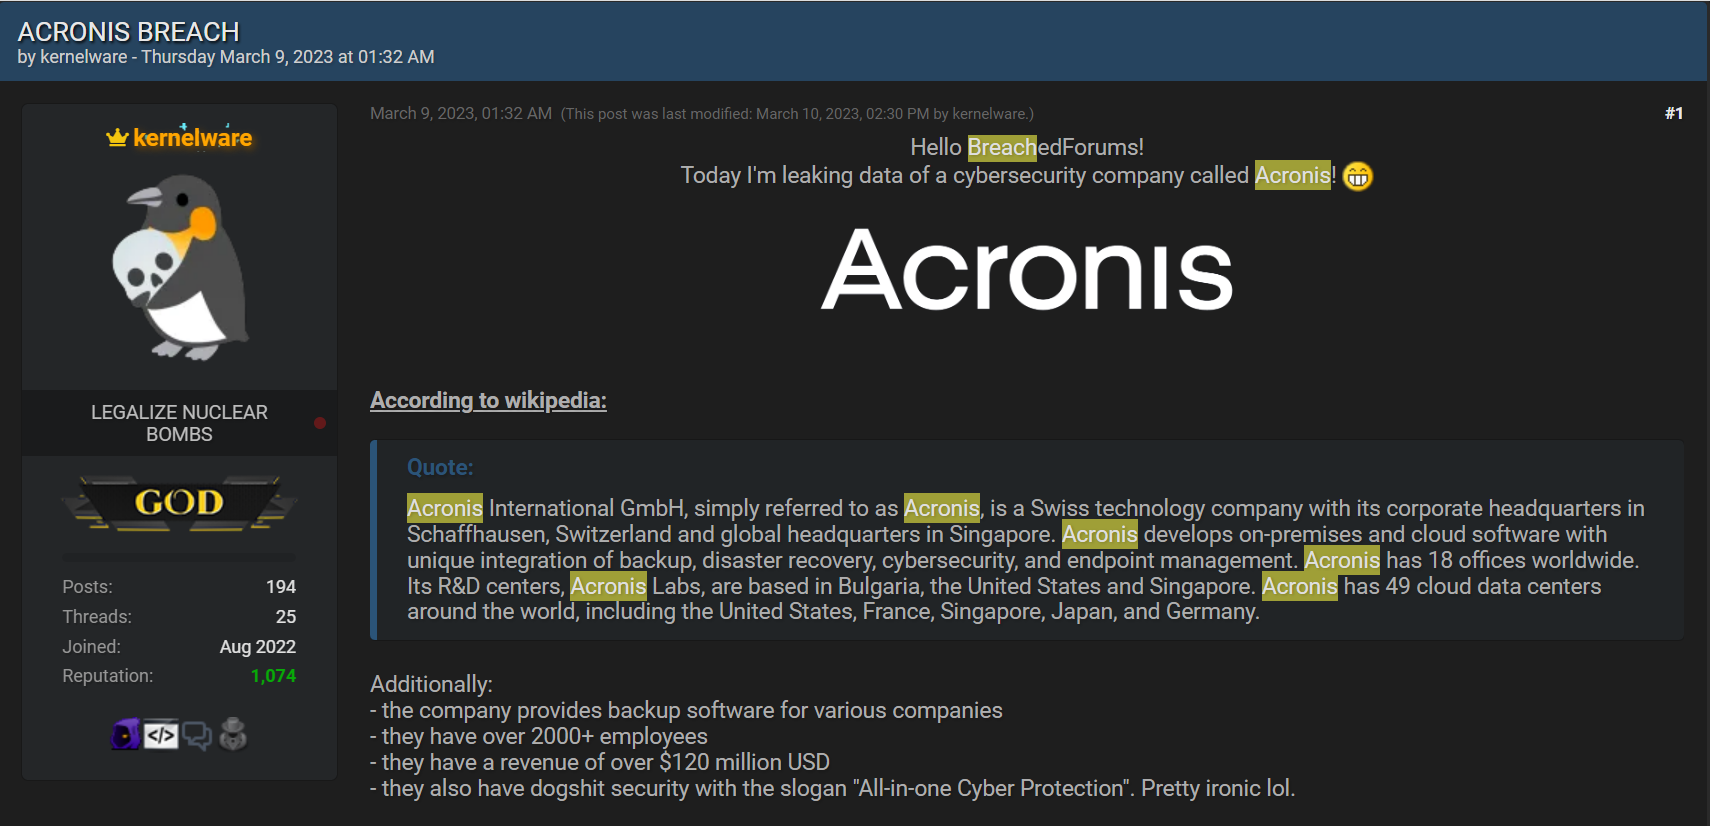 Acronis states that only one customer’s account has been compromised. Much ado about nothing